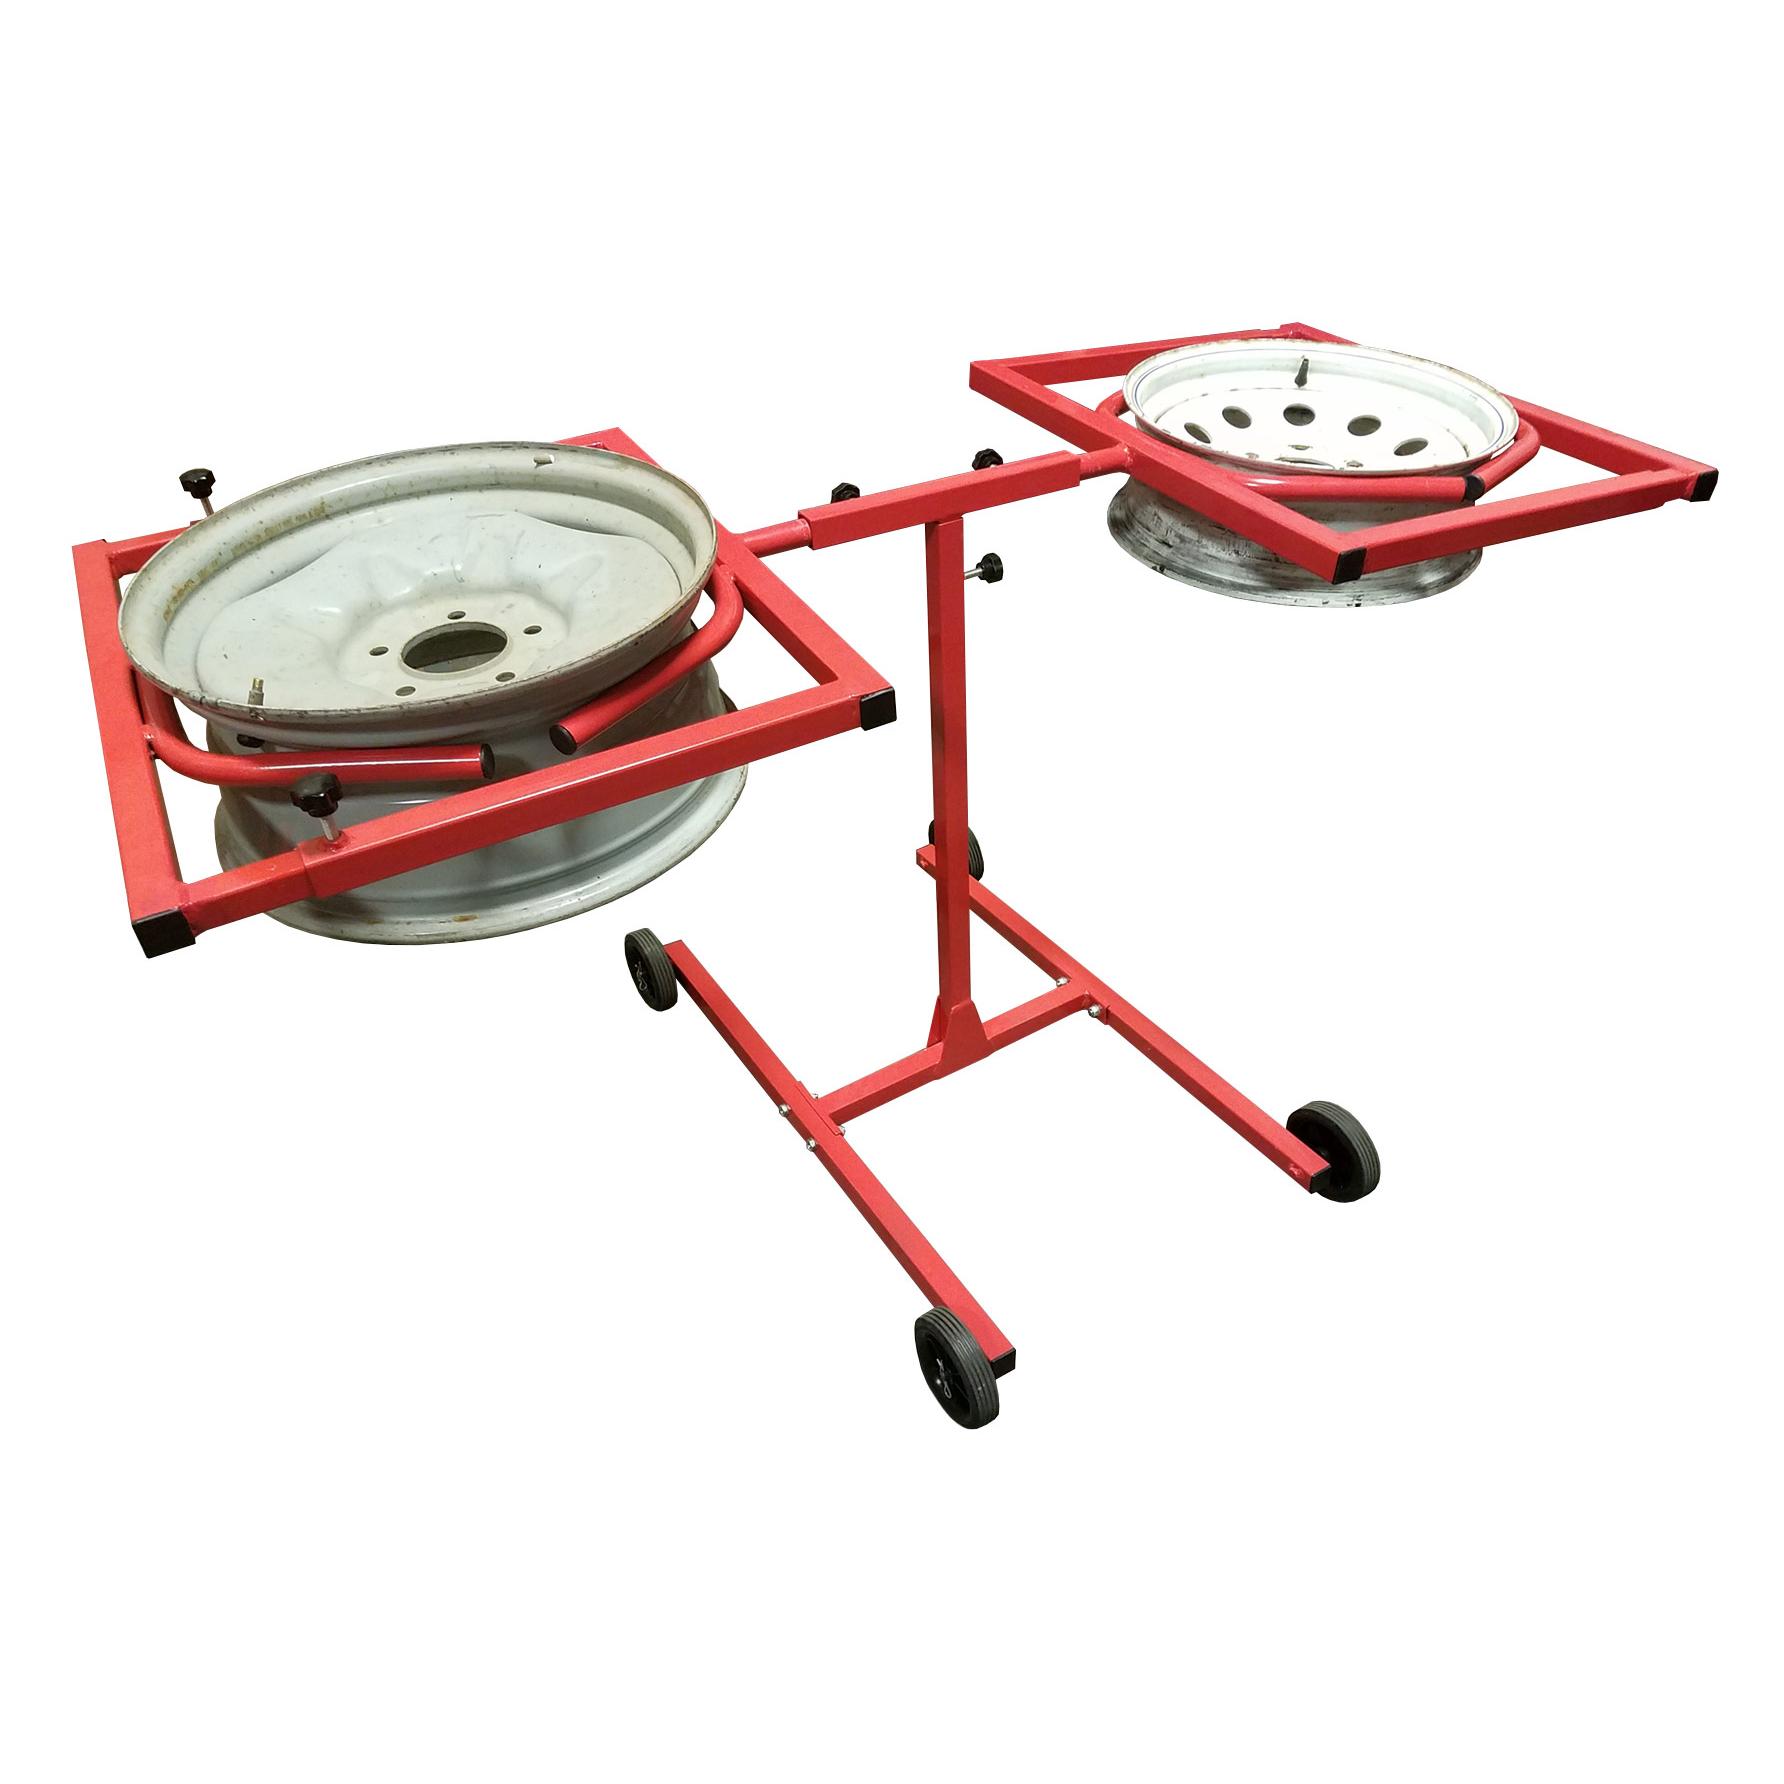 [DISCONTINUED] Redline Mobile Wheel Rim Rotating Paint Stand